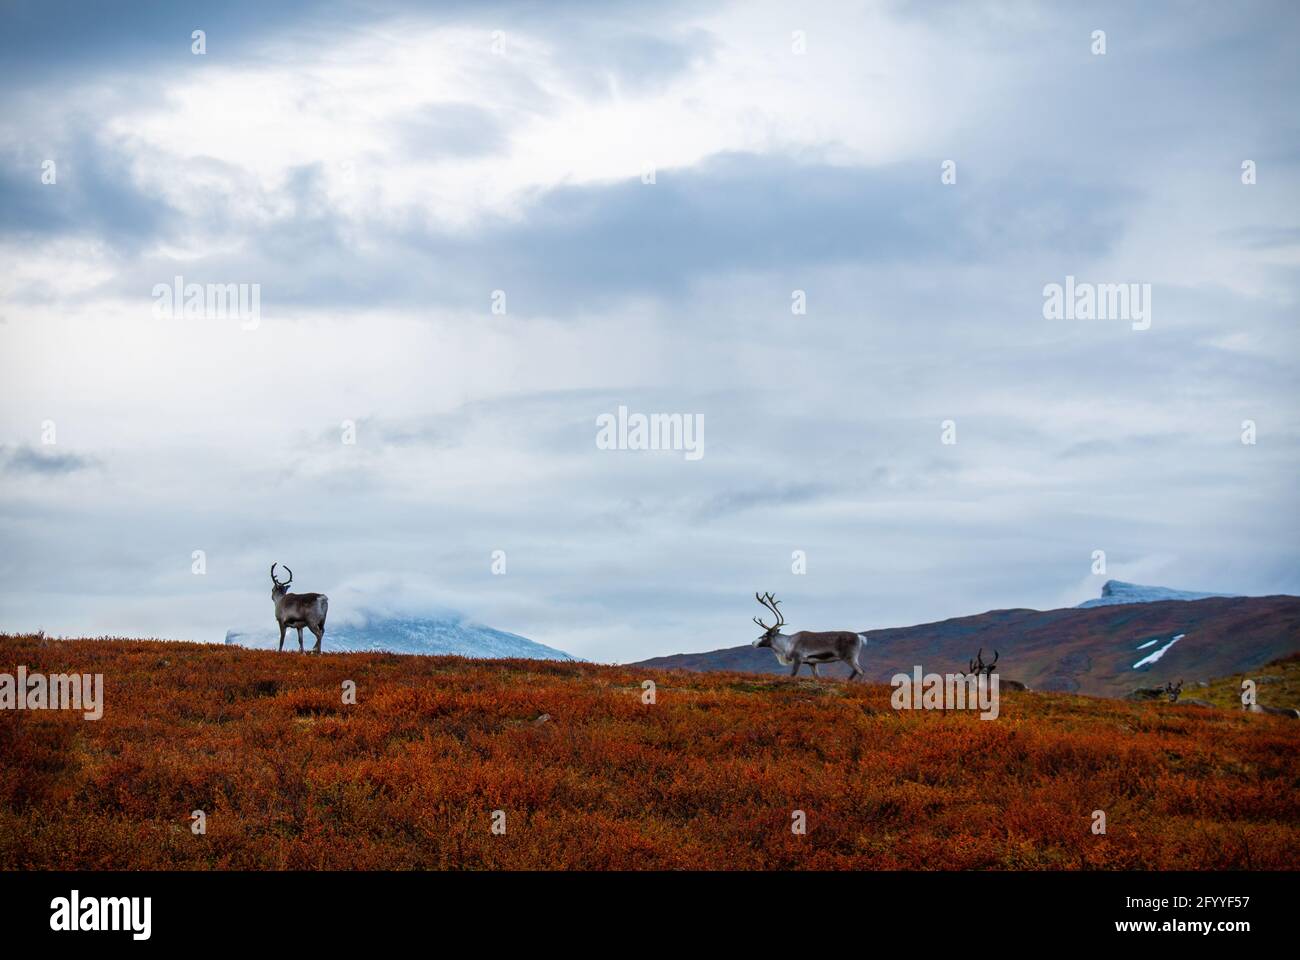 Reindeers met while hiking Kungsleden trail, early morning, September, Swedish Lapland. Stock Photo